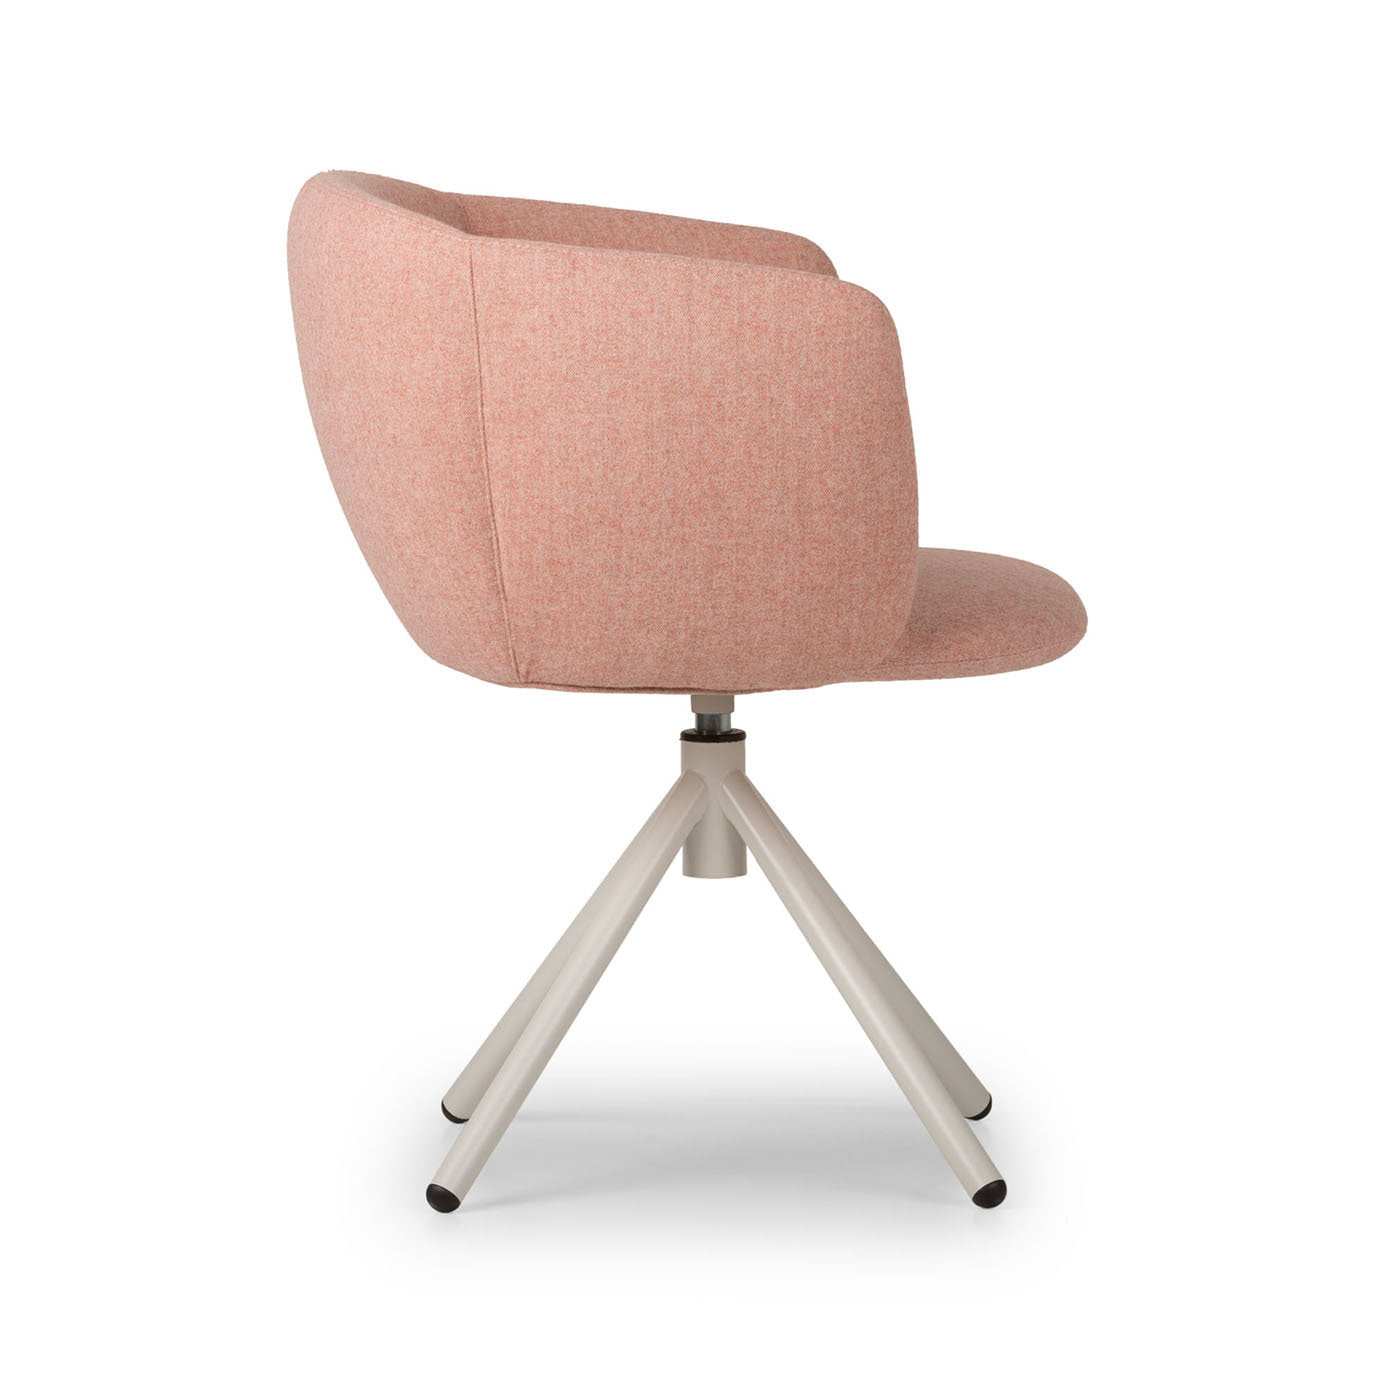 Not Pink Dining chair with Swivel Base  - Alternative view 1